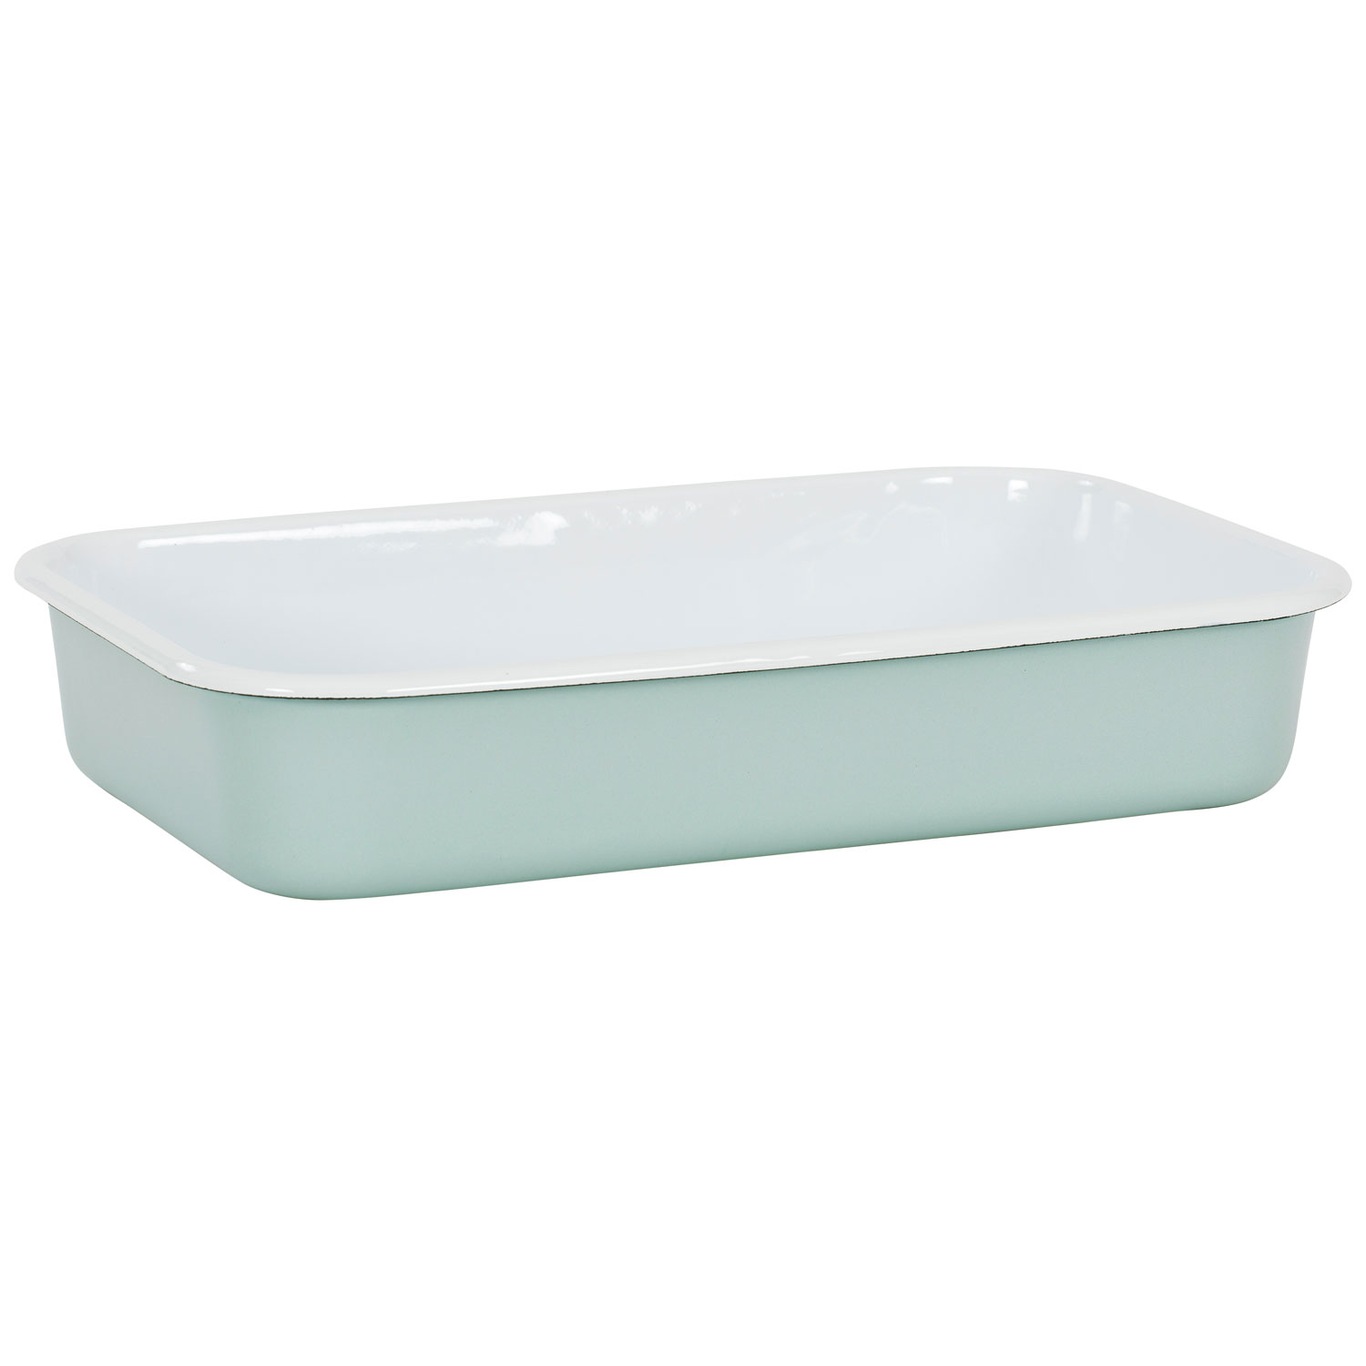 Oven Dish 31,5x20 cm, Green Orion